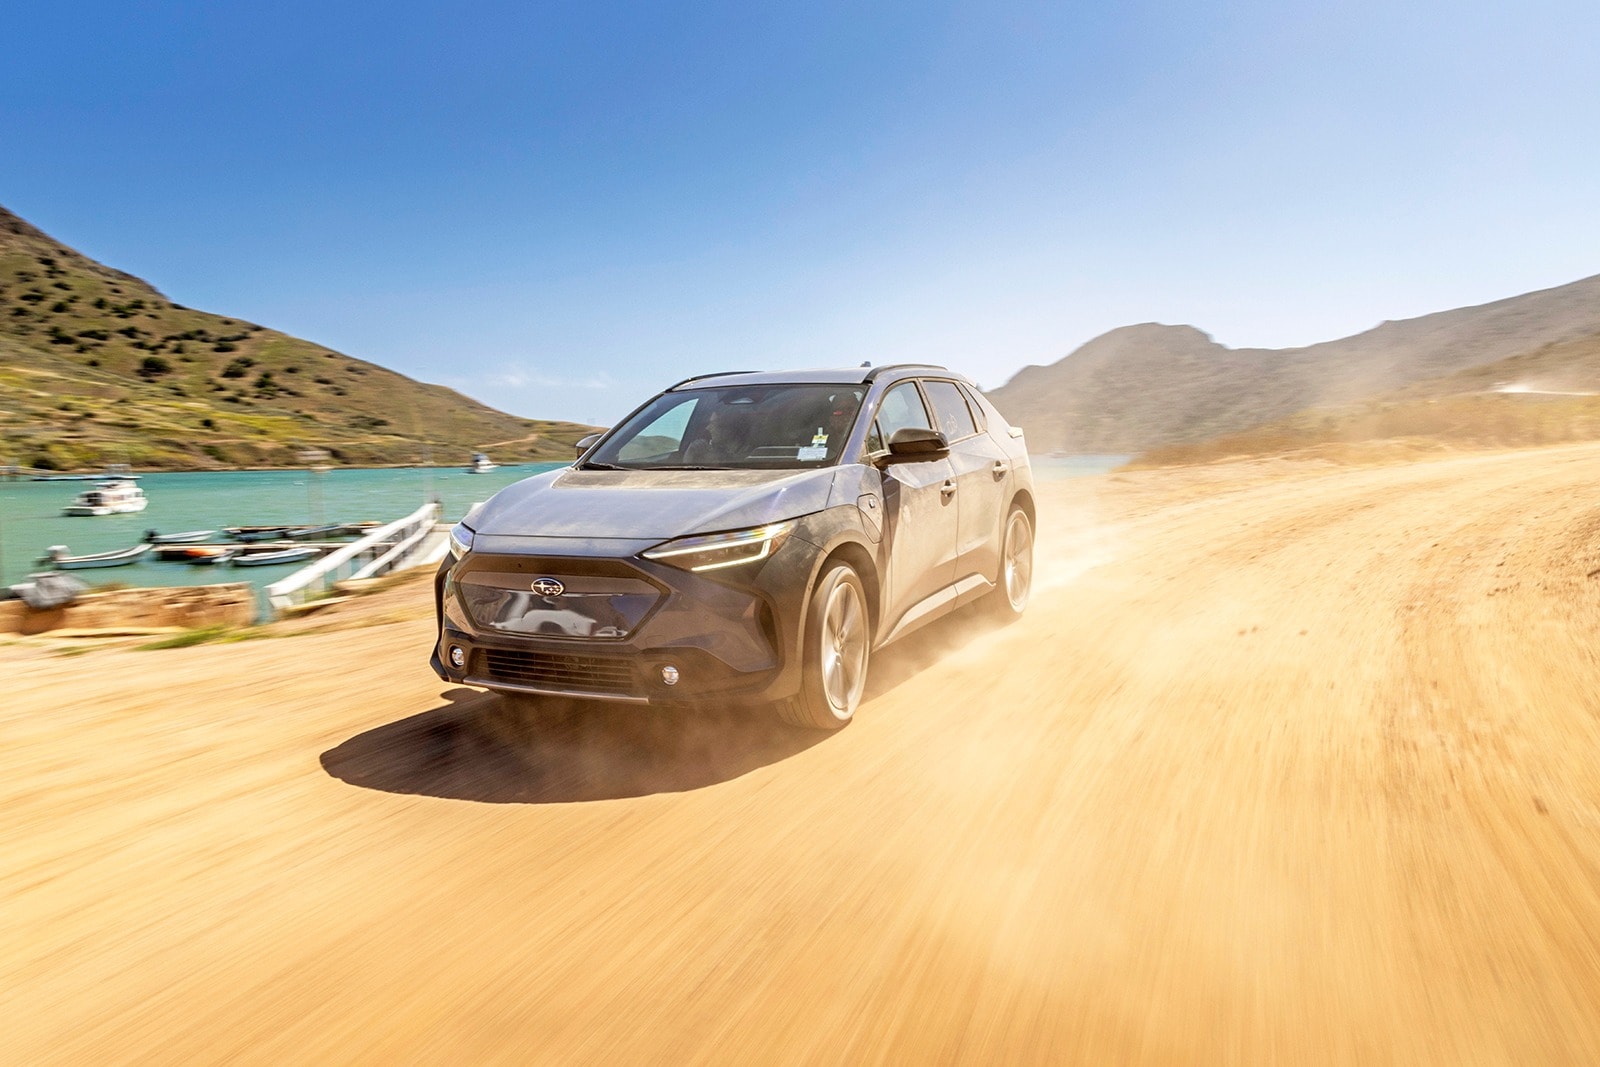 2023 Subaru Solterra: A More Capable Off-Road Electric SUV, but How Far Off Can You Actually Go?